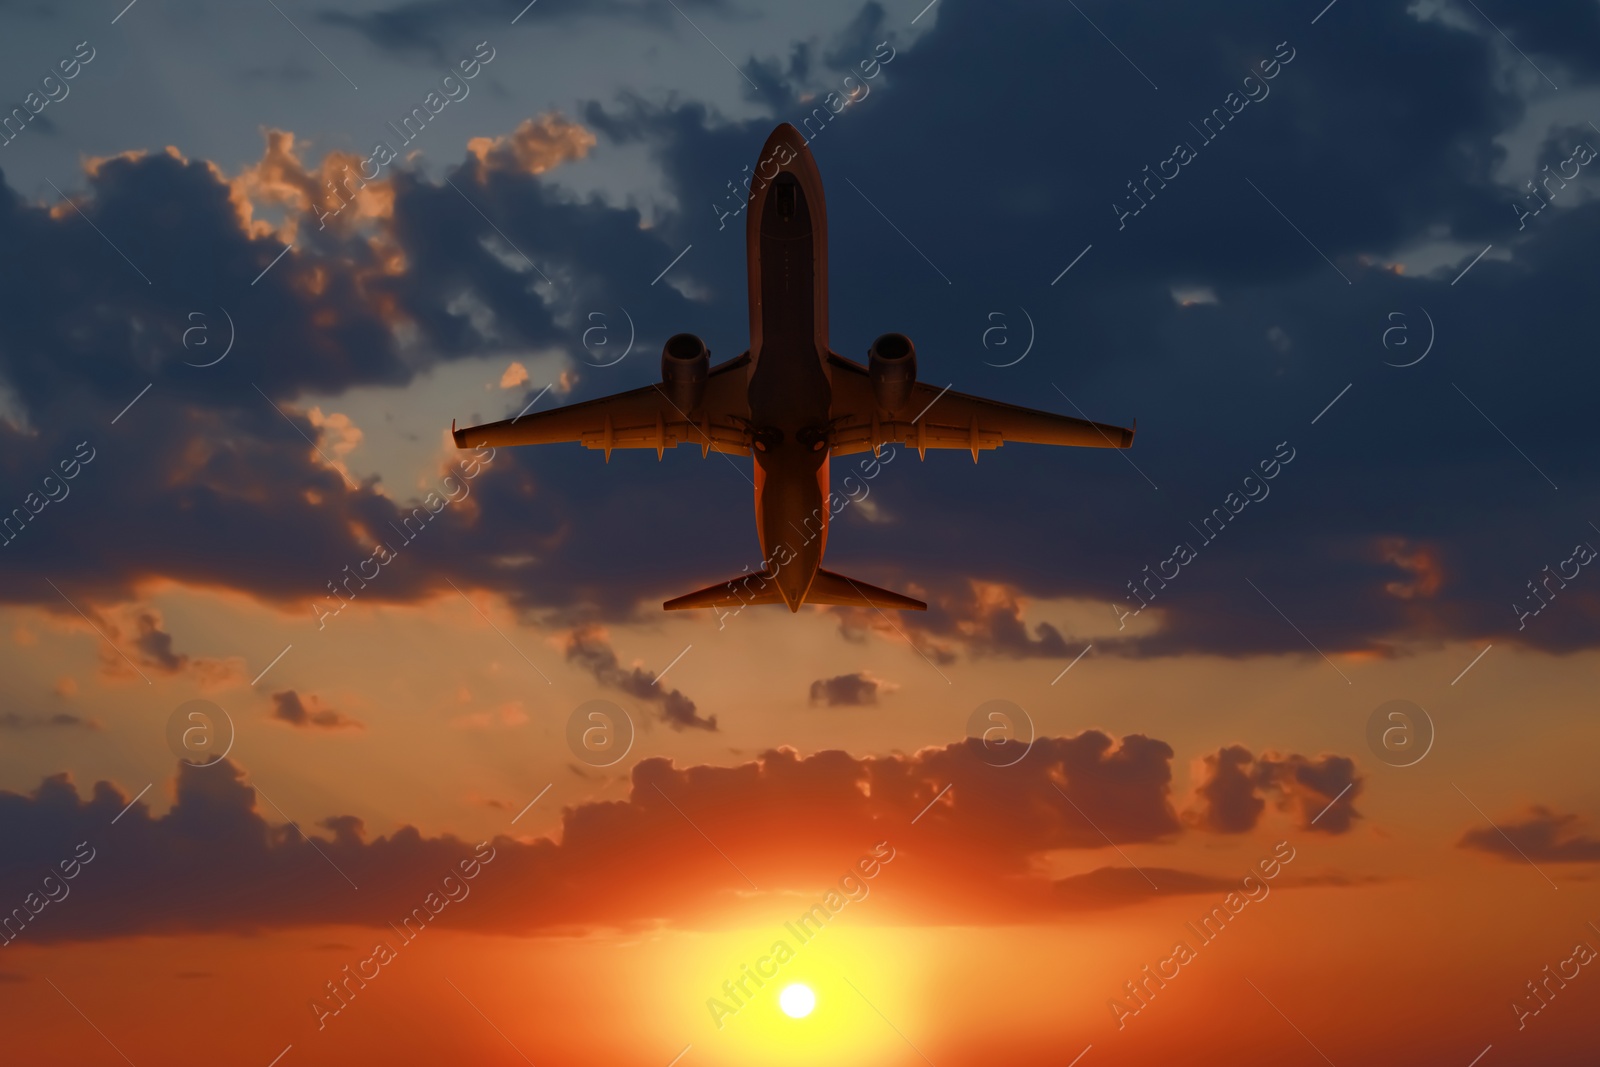 Image of Plane in sky during sunset, low angle view